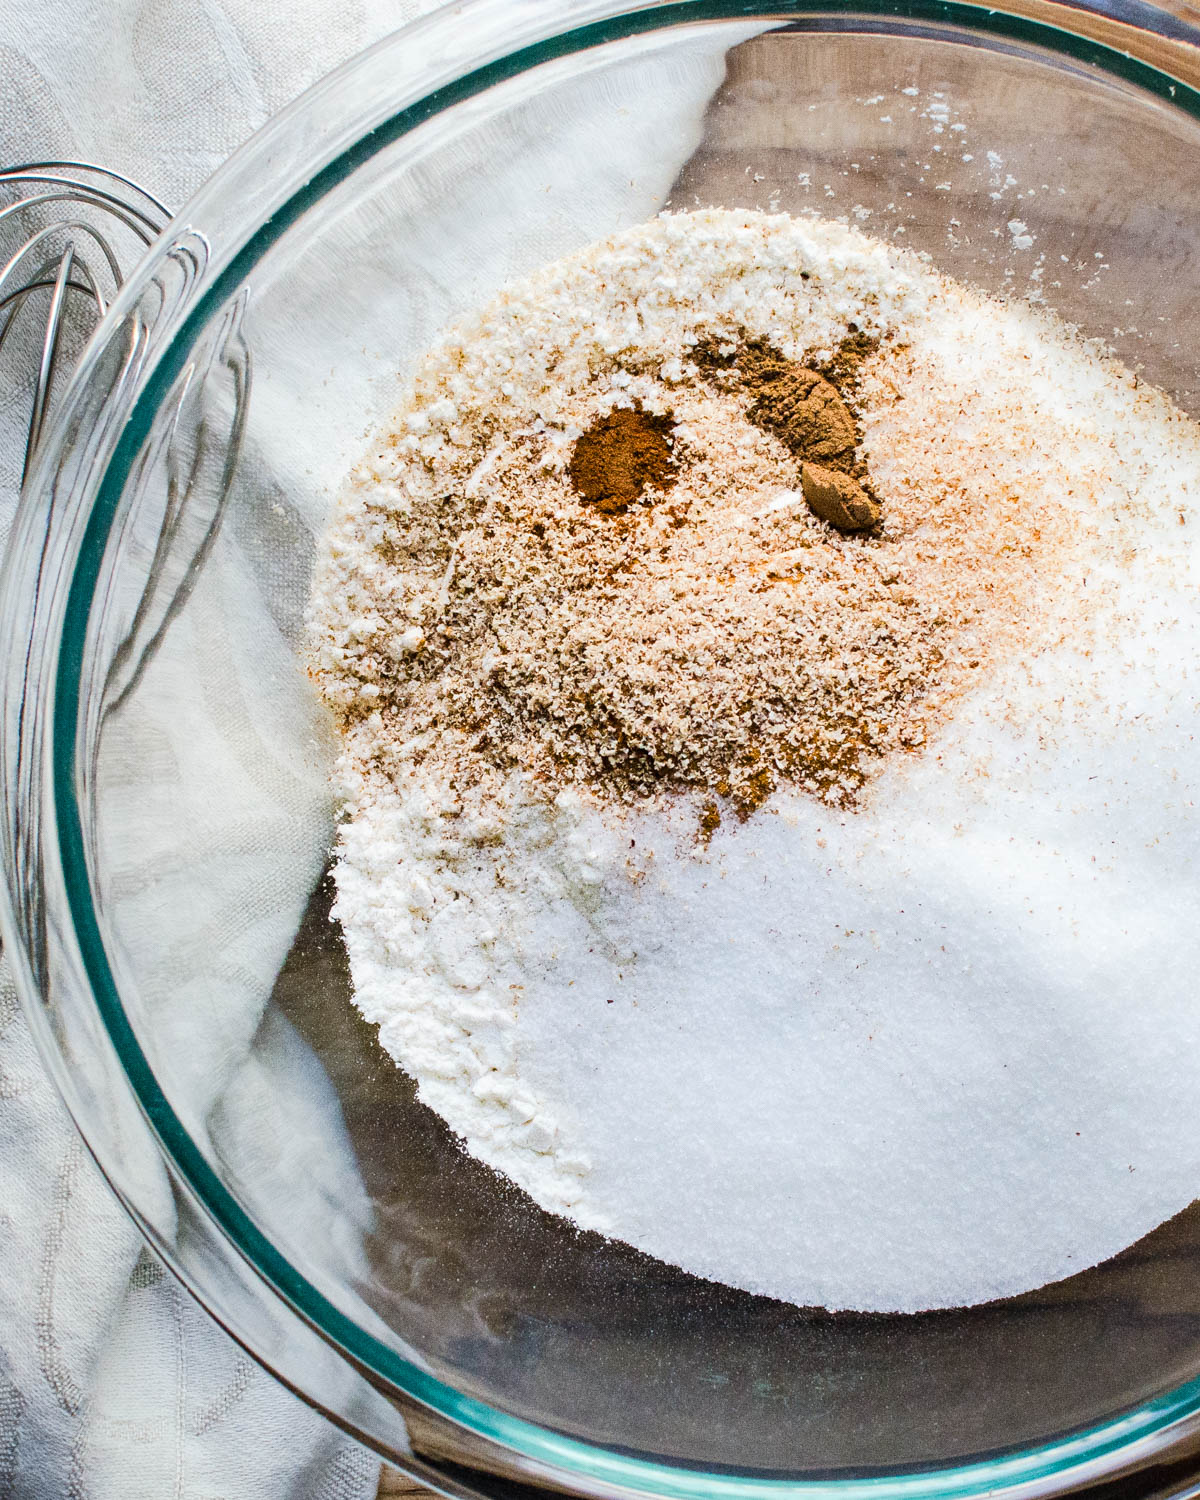 Mixing flour, sugar and spices in a bowl.